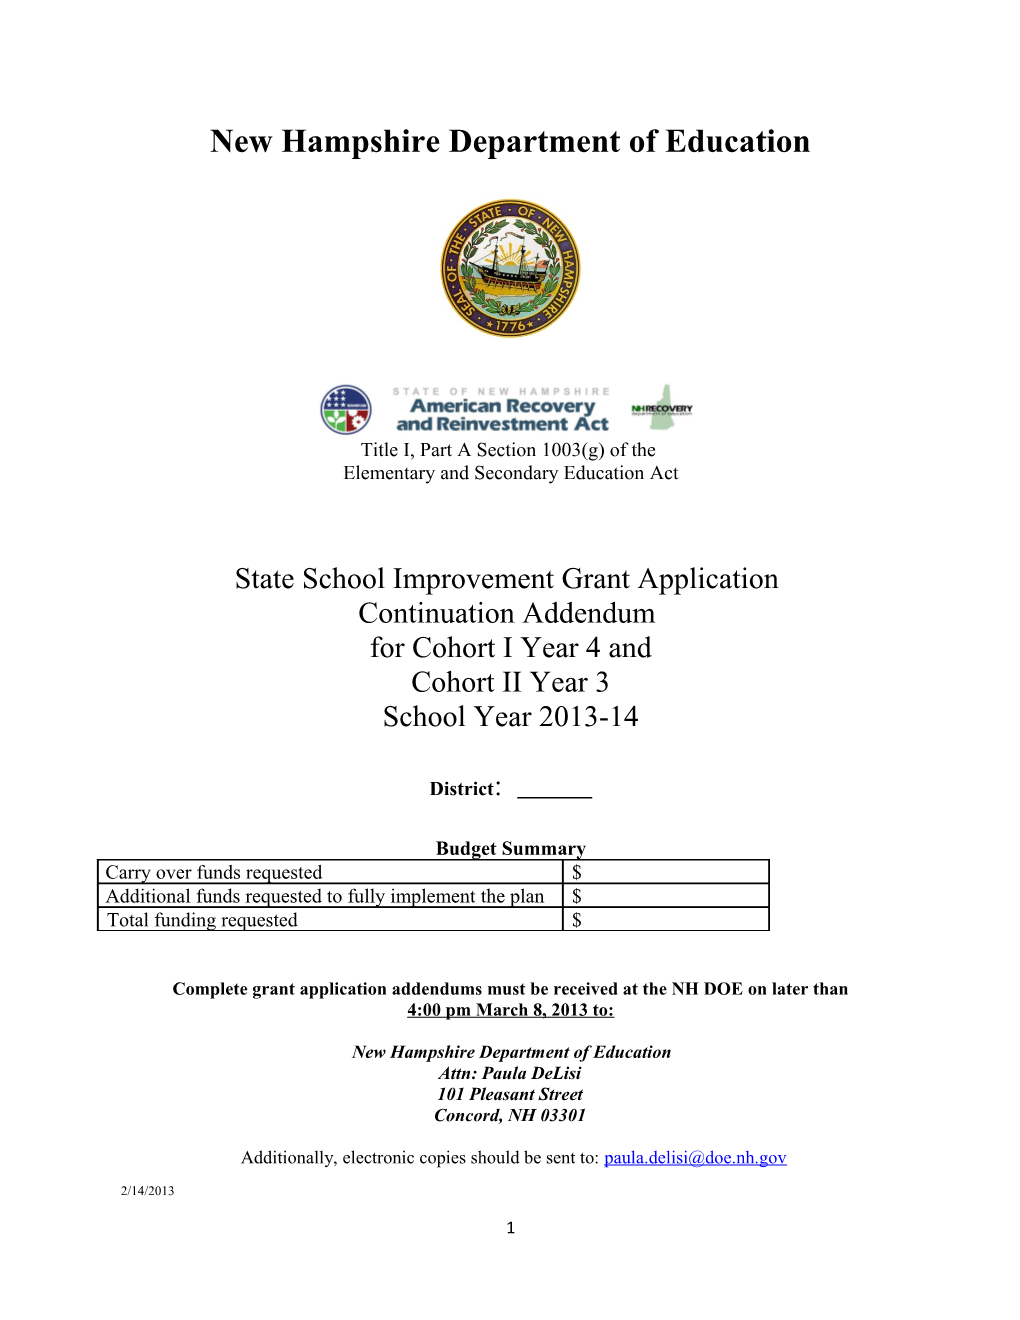 School Improvement Grants Application: Section 1003(G) of the Elementary and Secondary